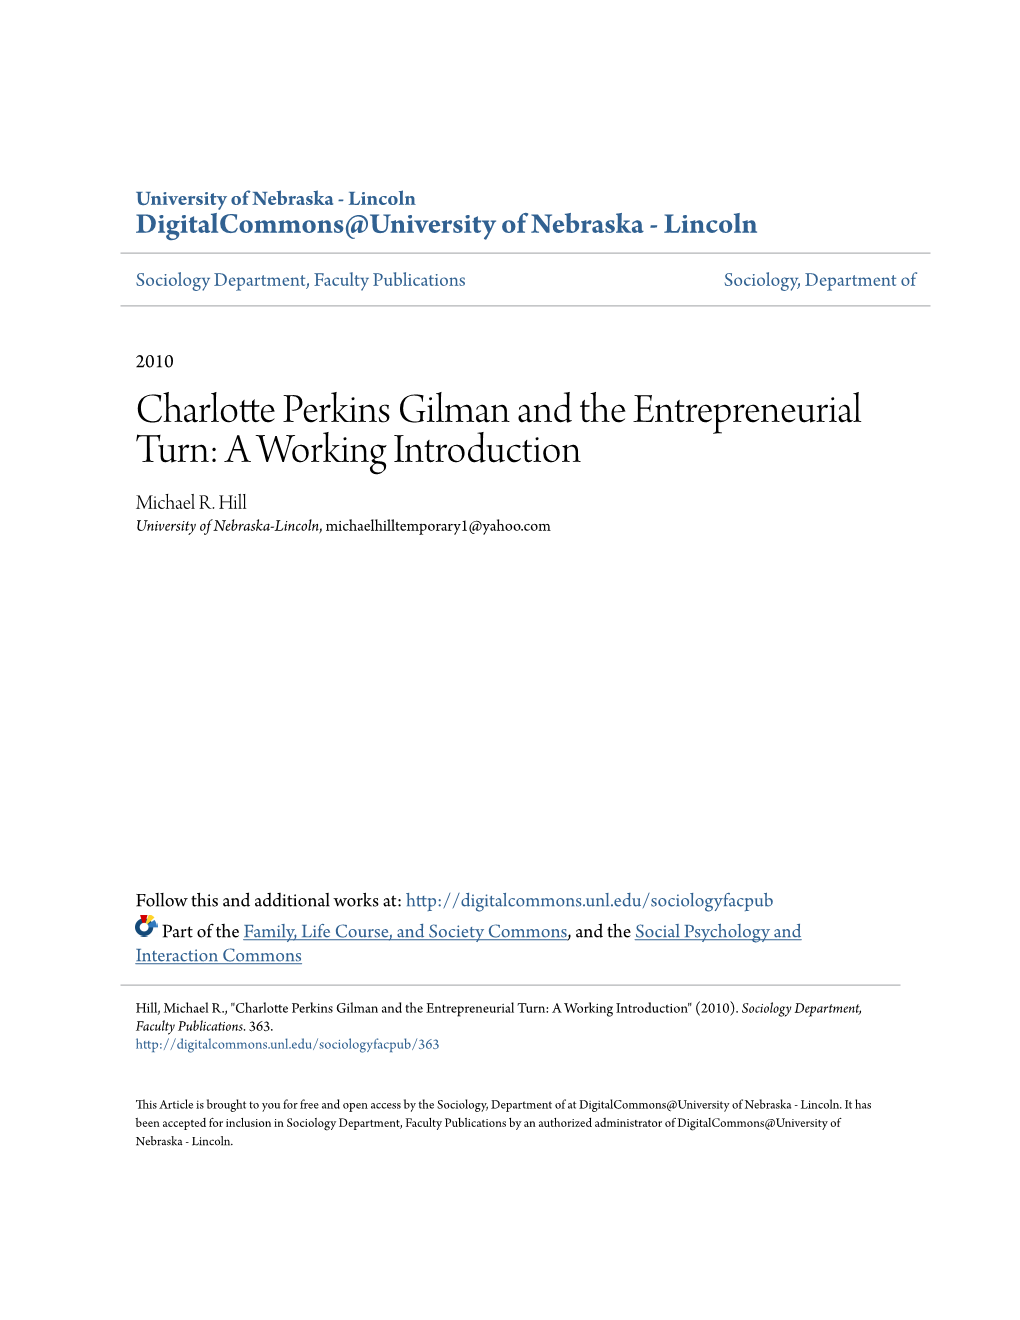 Charlotte Perkins Gilman and the Entrepreneurial Turn: a Working Introduction Michael R